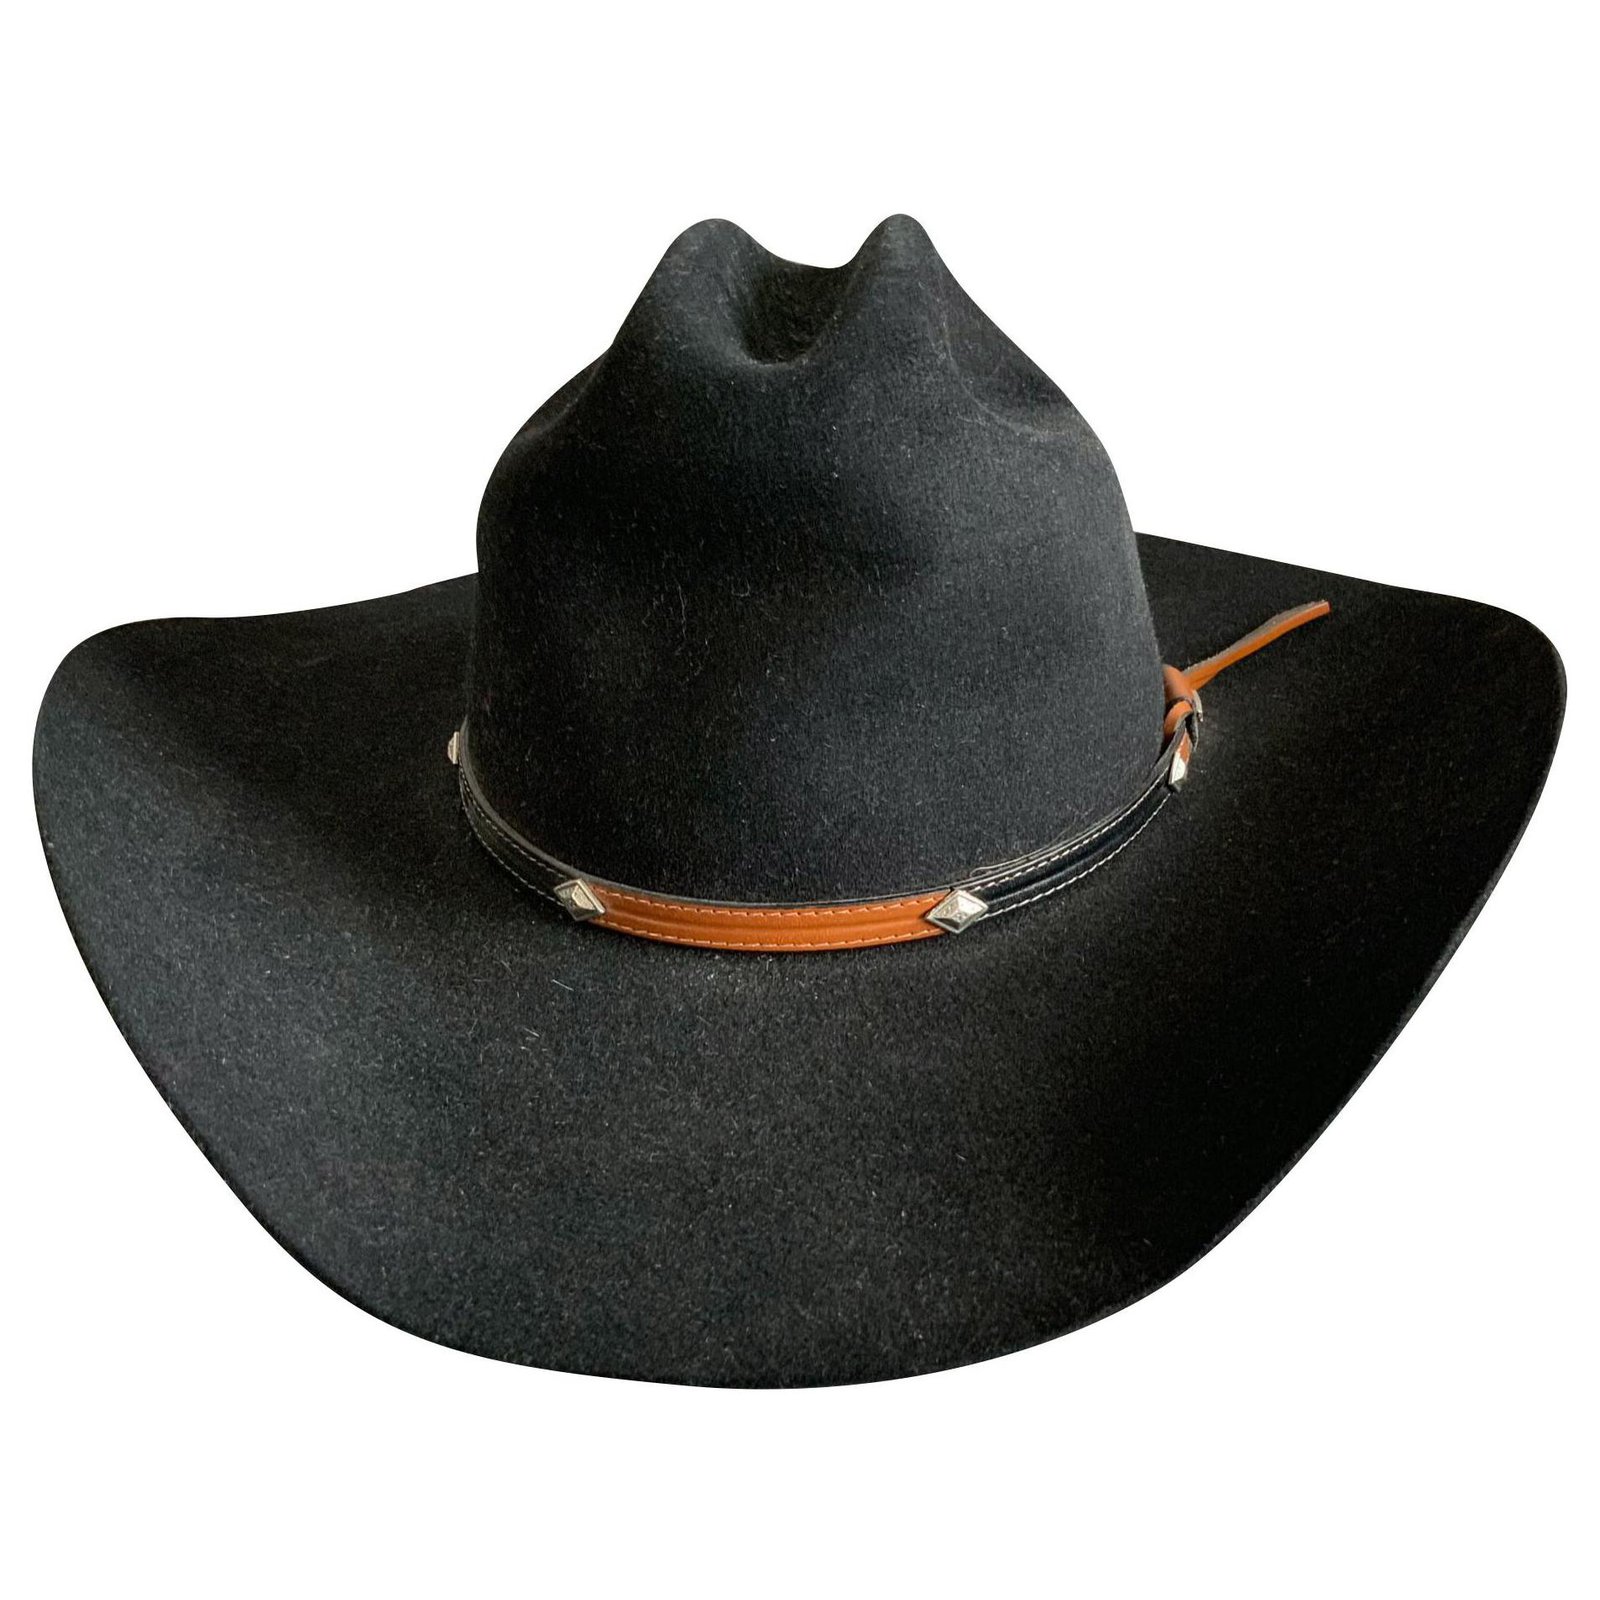 My Stetson Email Login - Login Pages Info